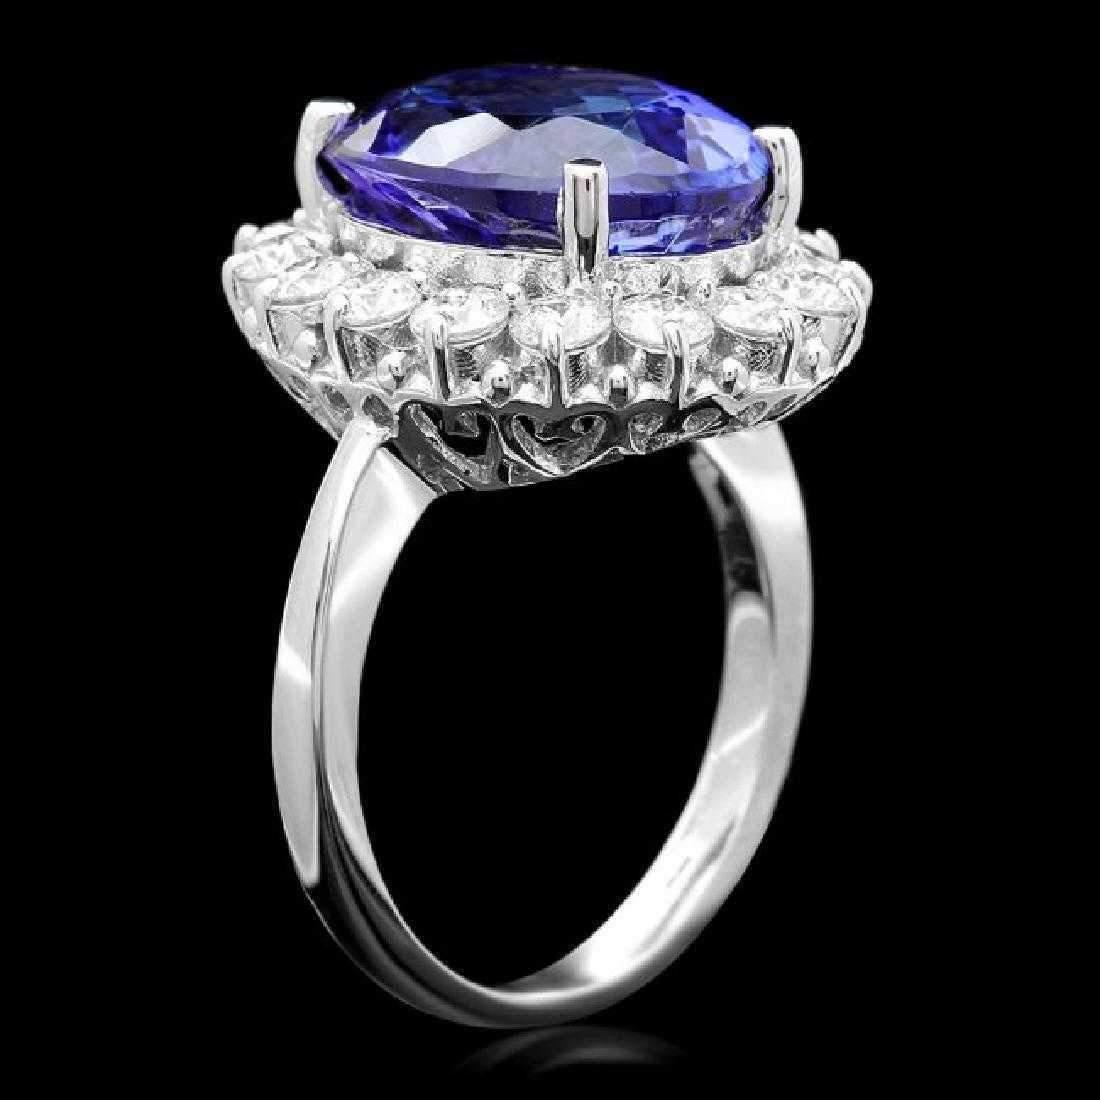 10.40 Carats Natural Very Nice Looking Tanzanite and Diamond 14K Solid White Gold Ring

Total Natural Oval Cut Tanzanite Weight is: Approx. 9.00 Carats

Tanzanite Measures: Approx. 14.00 x 12.00mm

Natural Round Diamonds Weight: Approx. 1.40 Carats